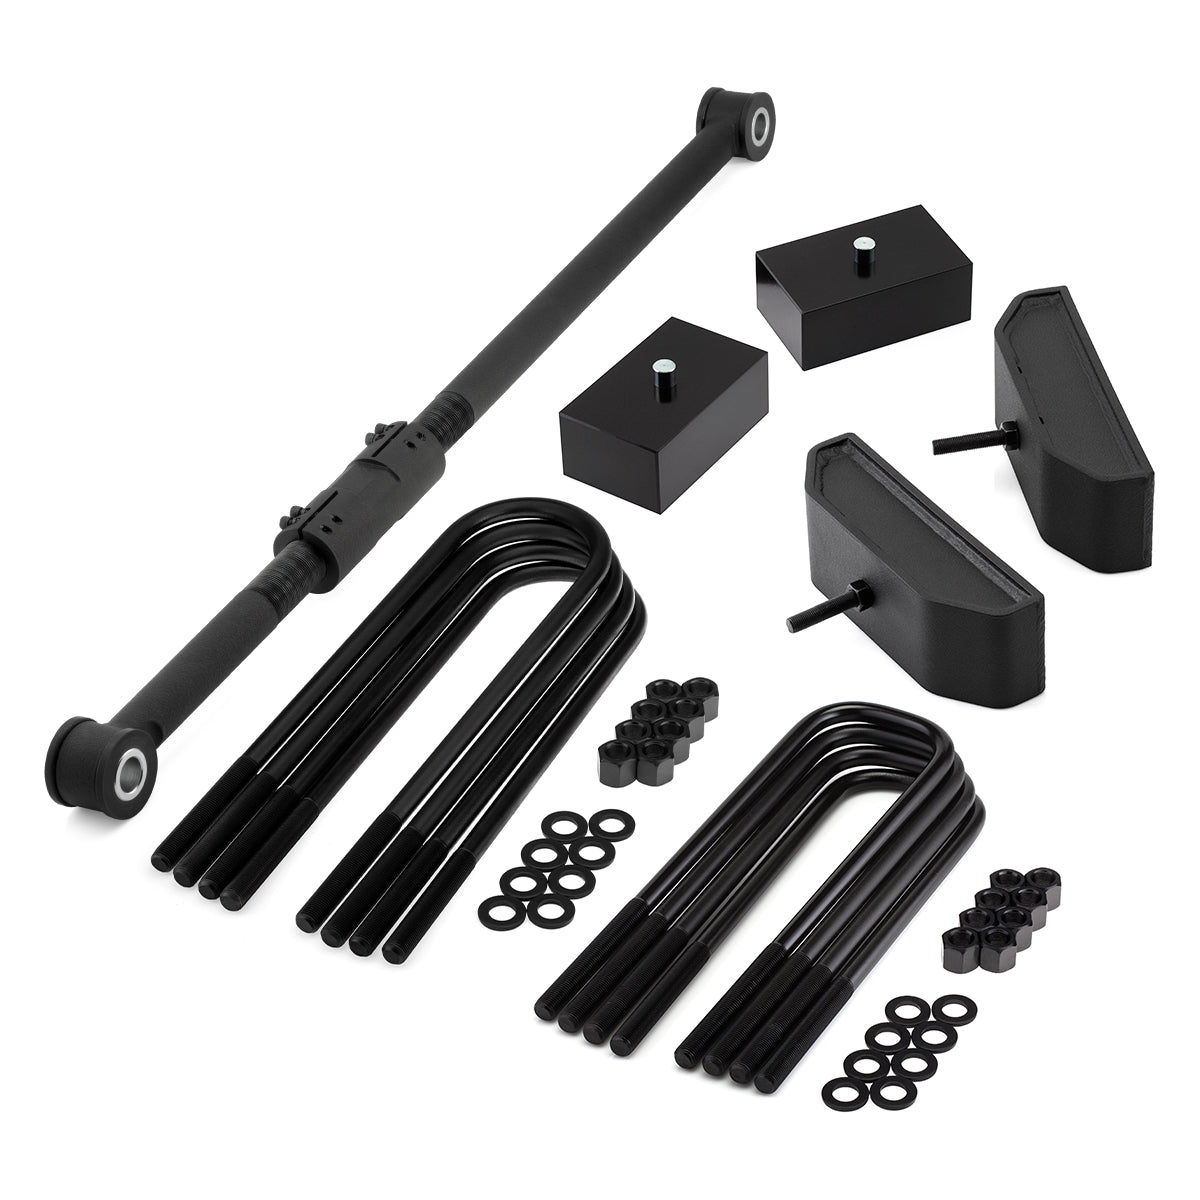 1999-2004 Ford F-250 Super Duty 4WD Full Suspension Lift Kit with Adjustable Track Bar